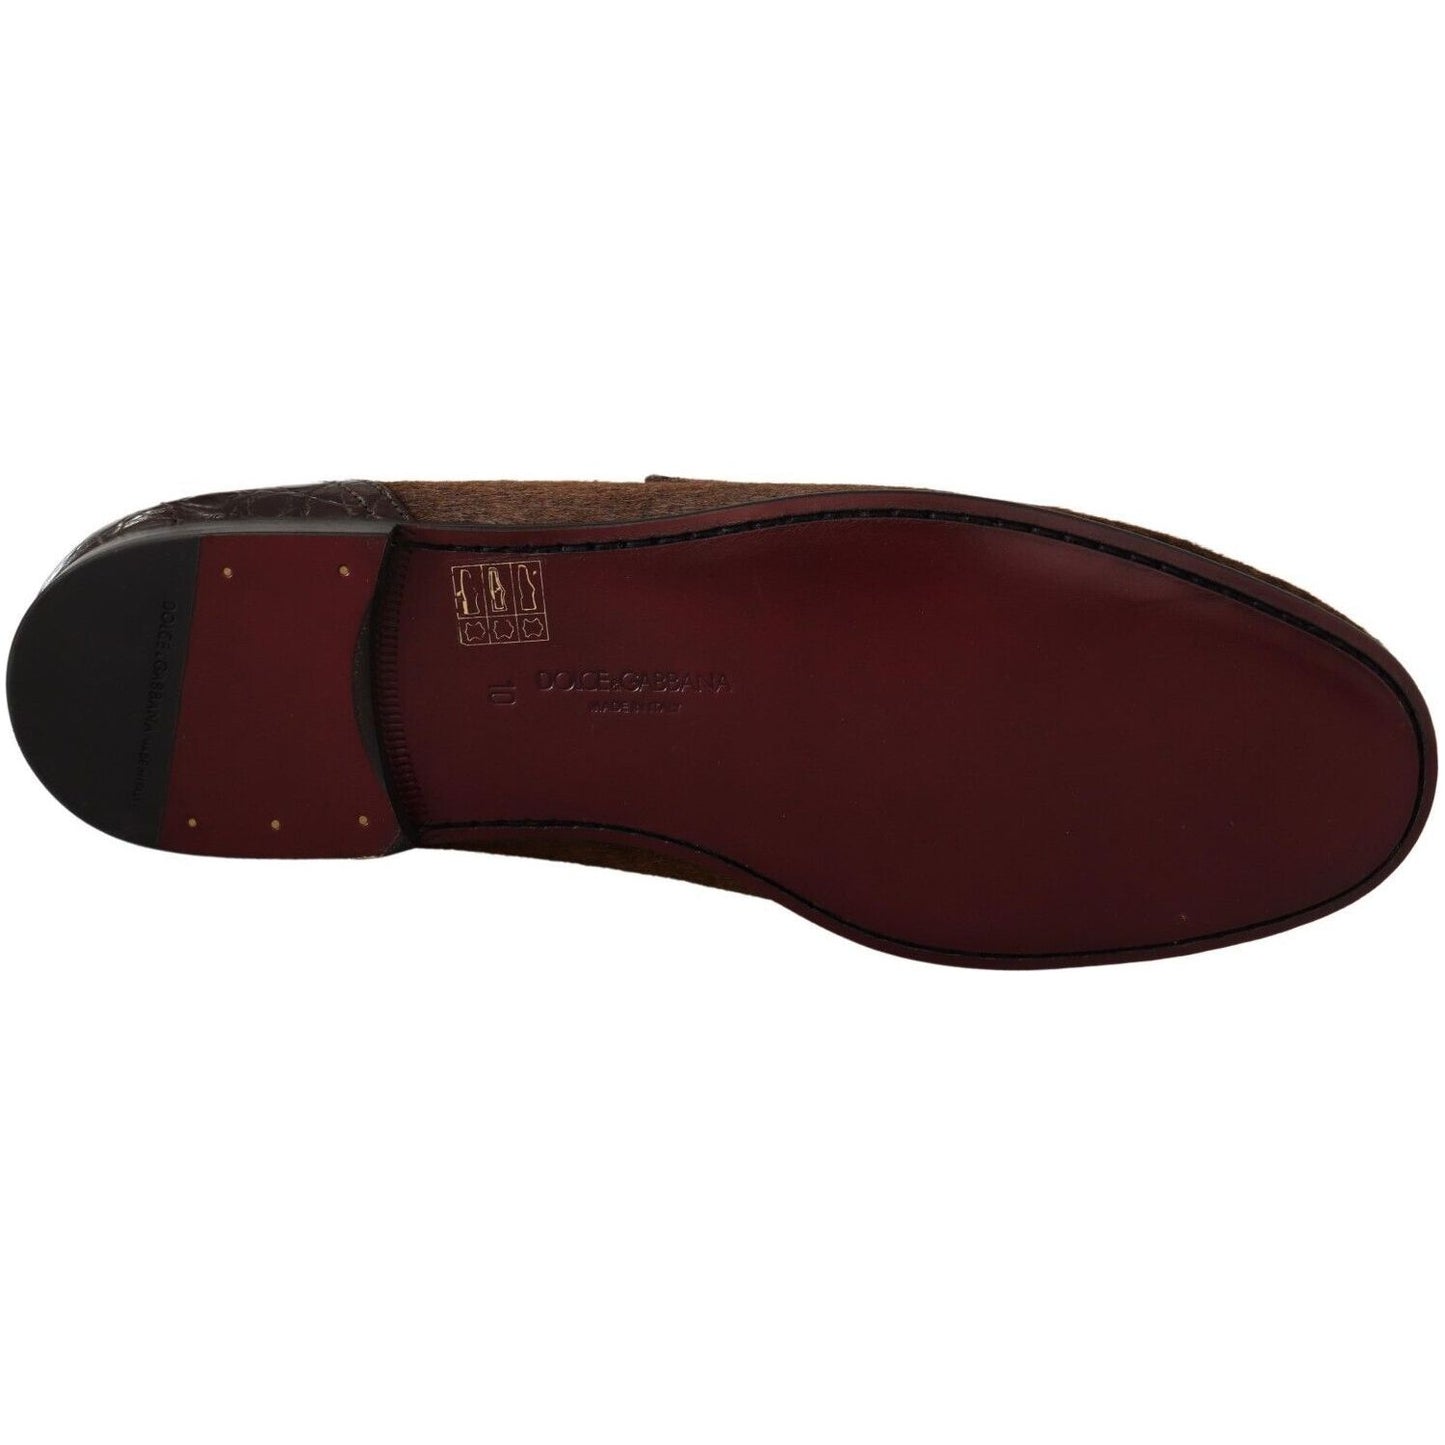 Dolce & Gabbana Exquisite Exotic Leather Loafers brown-exotic-leather-mens-slip-on-loafers-shoes s-l1600-20-6-5b9fe5c6-b9d.jpg